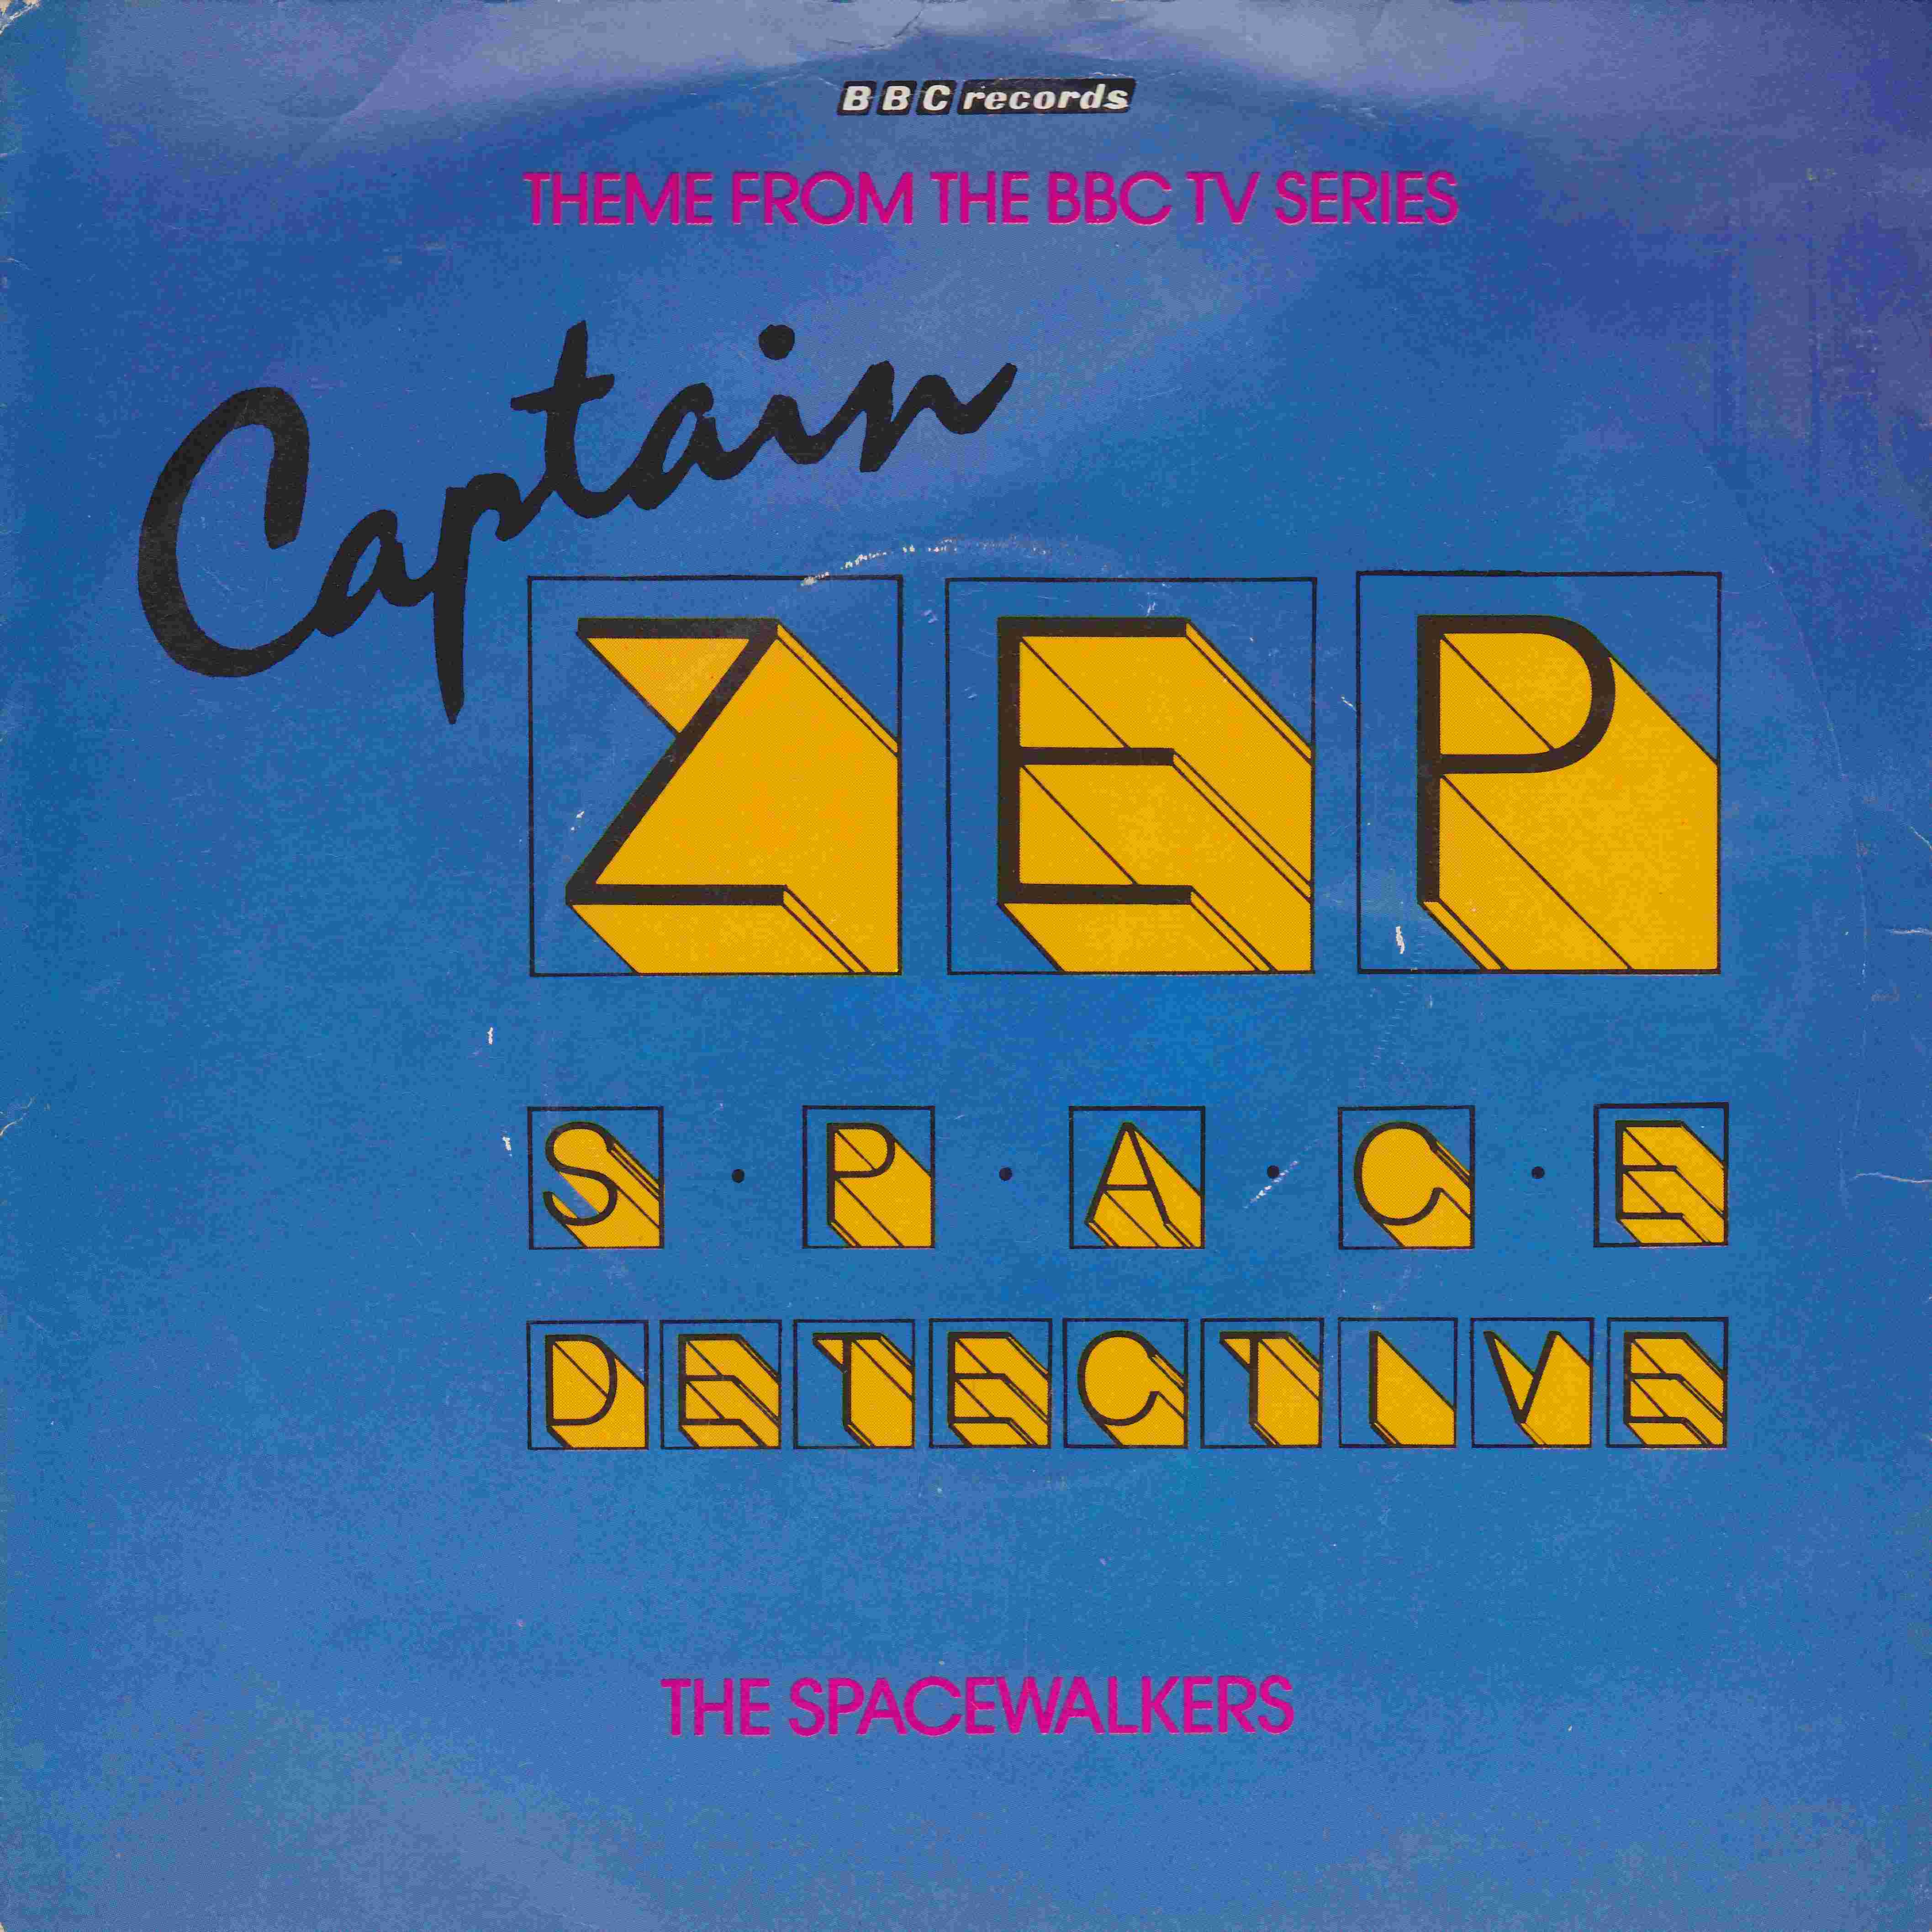 Picture of RESL 127 Captain Zep by artist Smith / Aitken from the BBC singles - Records and Tapes library